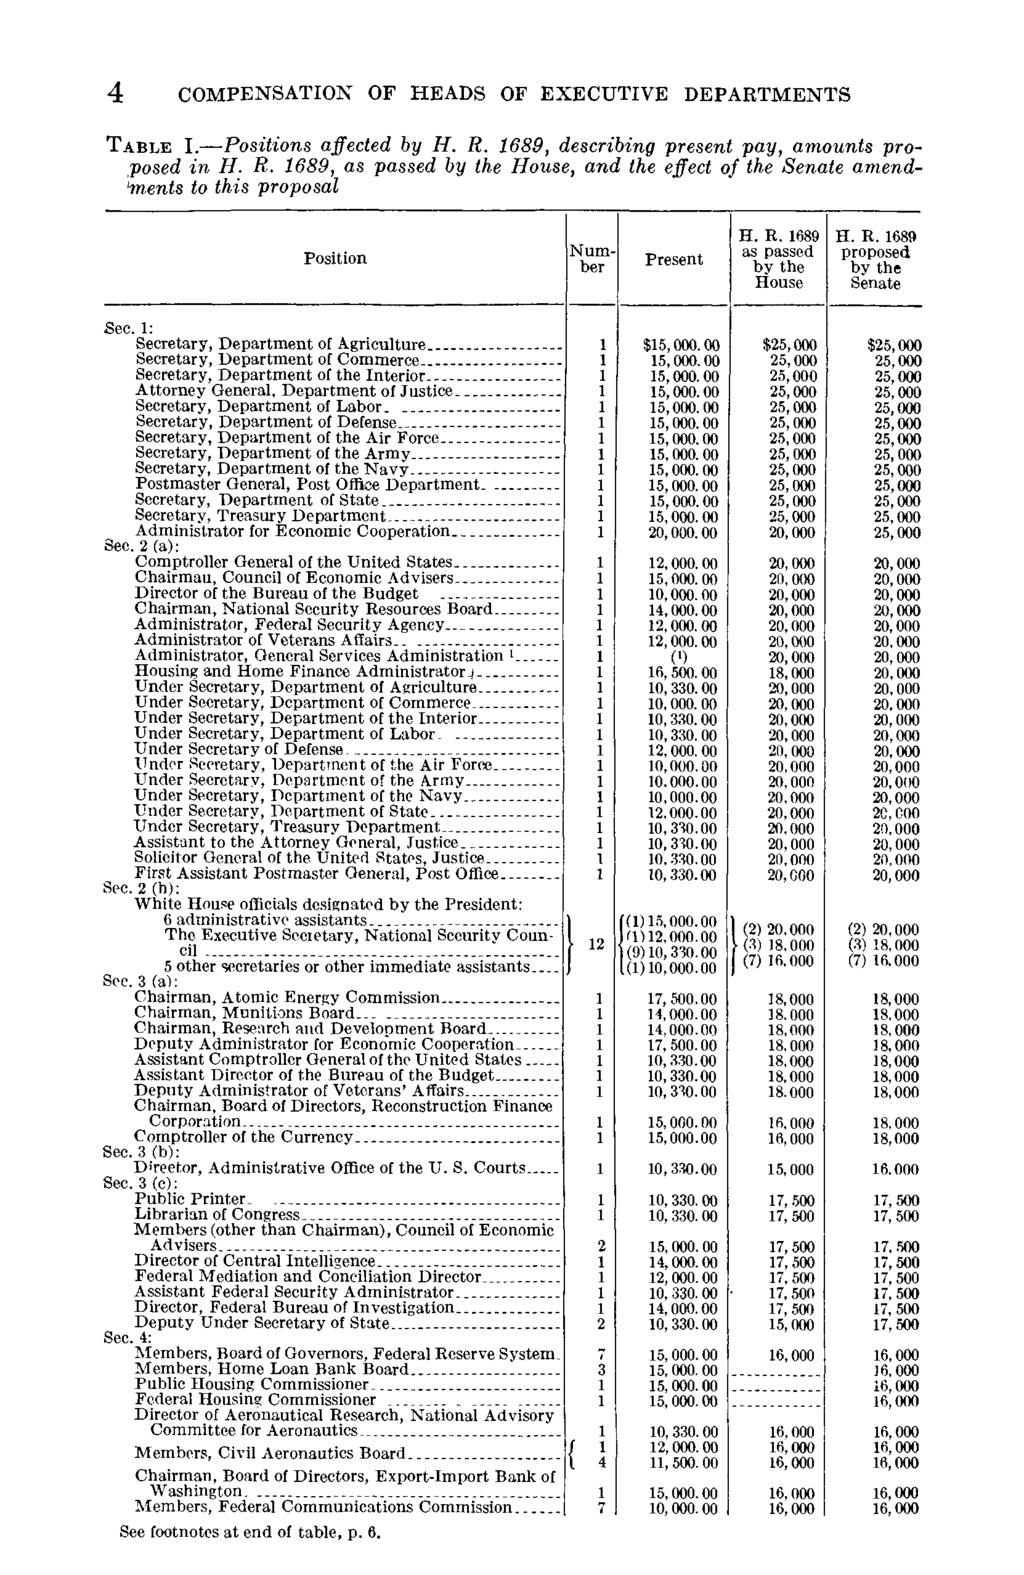 COMPENSATION OF HEADS OF EXECUTIVE DEPARTMENTS TABLE I. Positions affected by H. R. 689, describing present pay, amounts proposed in H. R. 689, as passed House, and the effect of the Senate amend- 'ments to this proposal Position Number Present H.